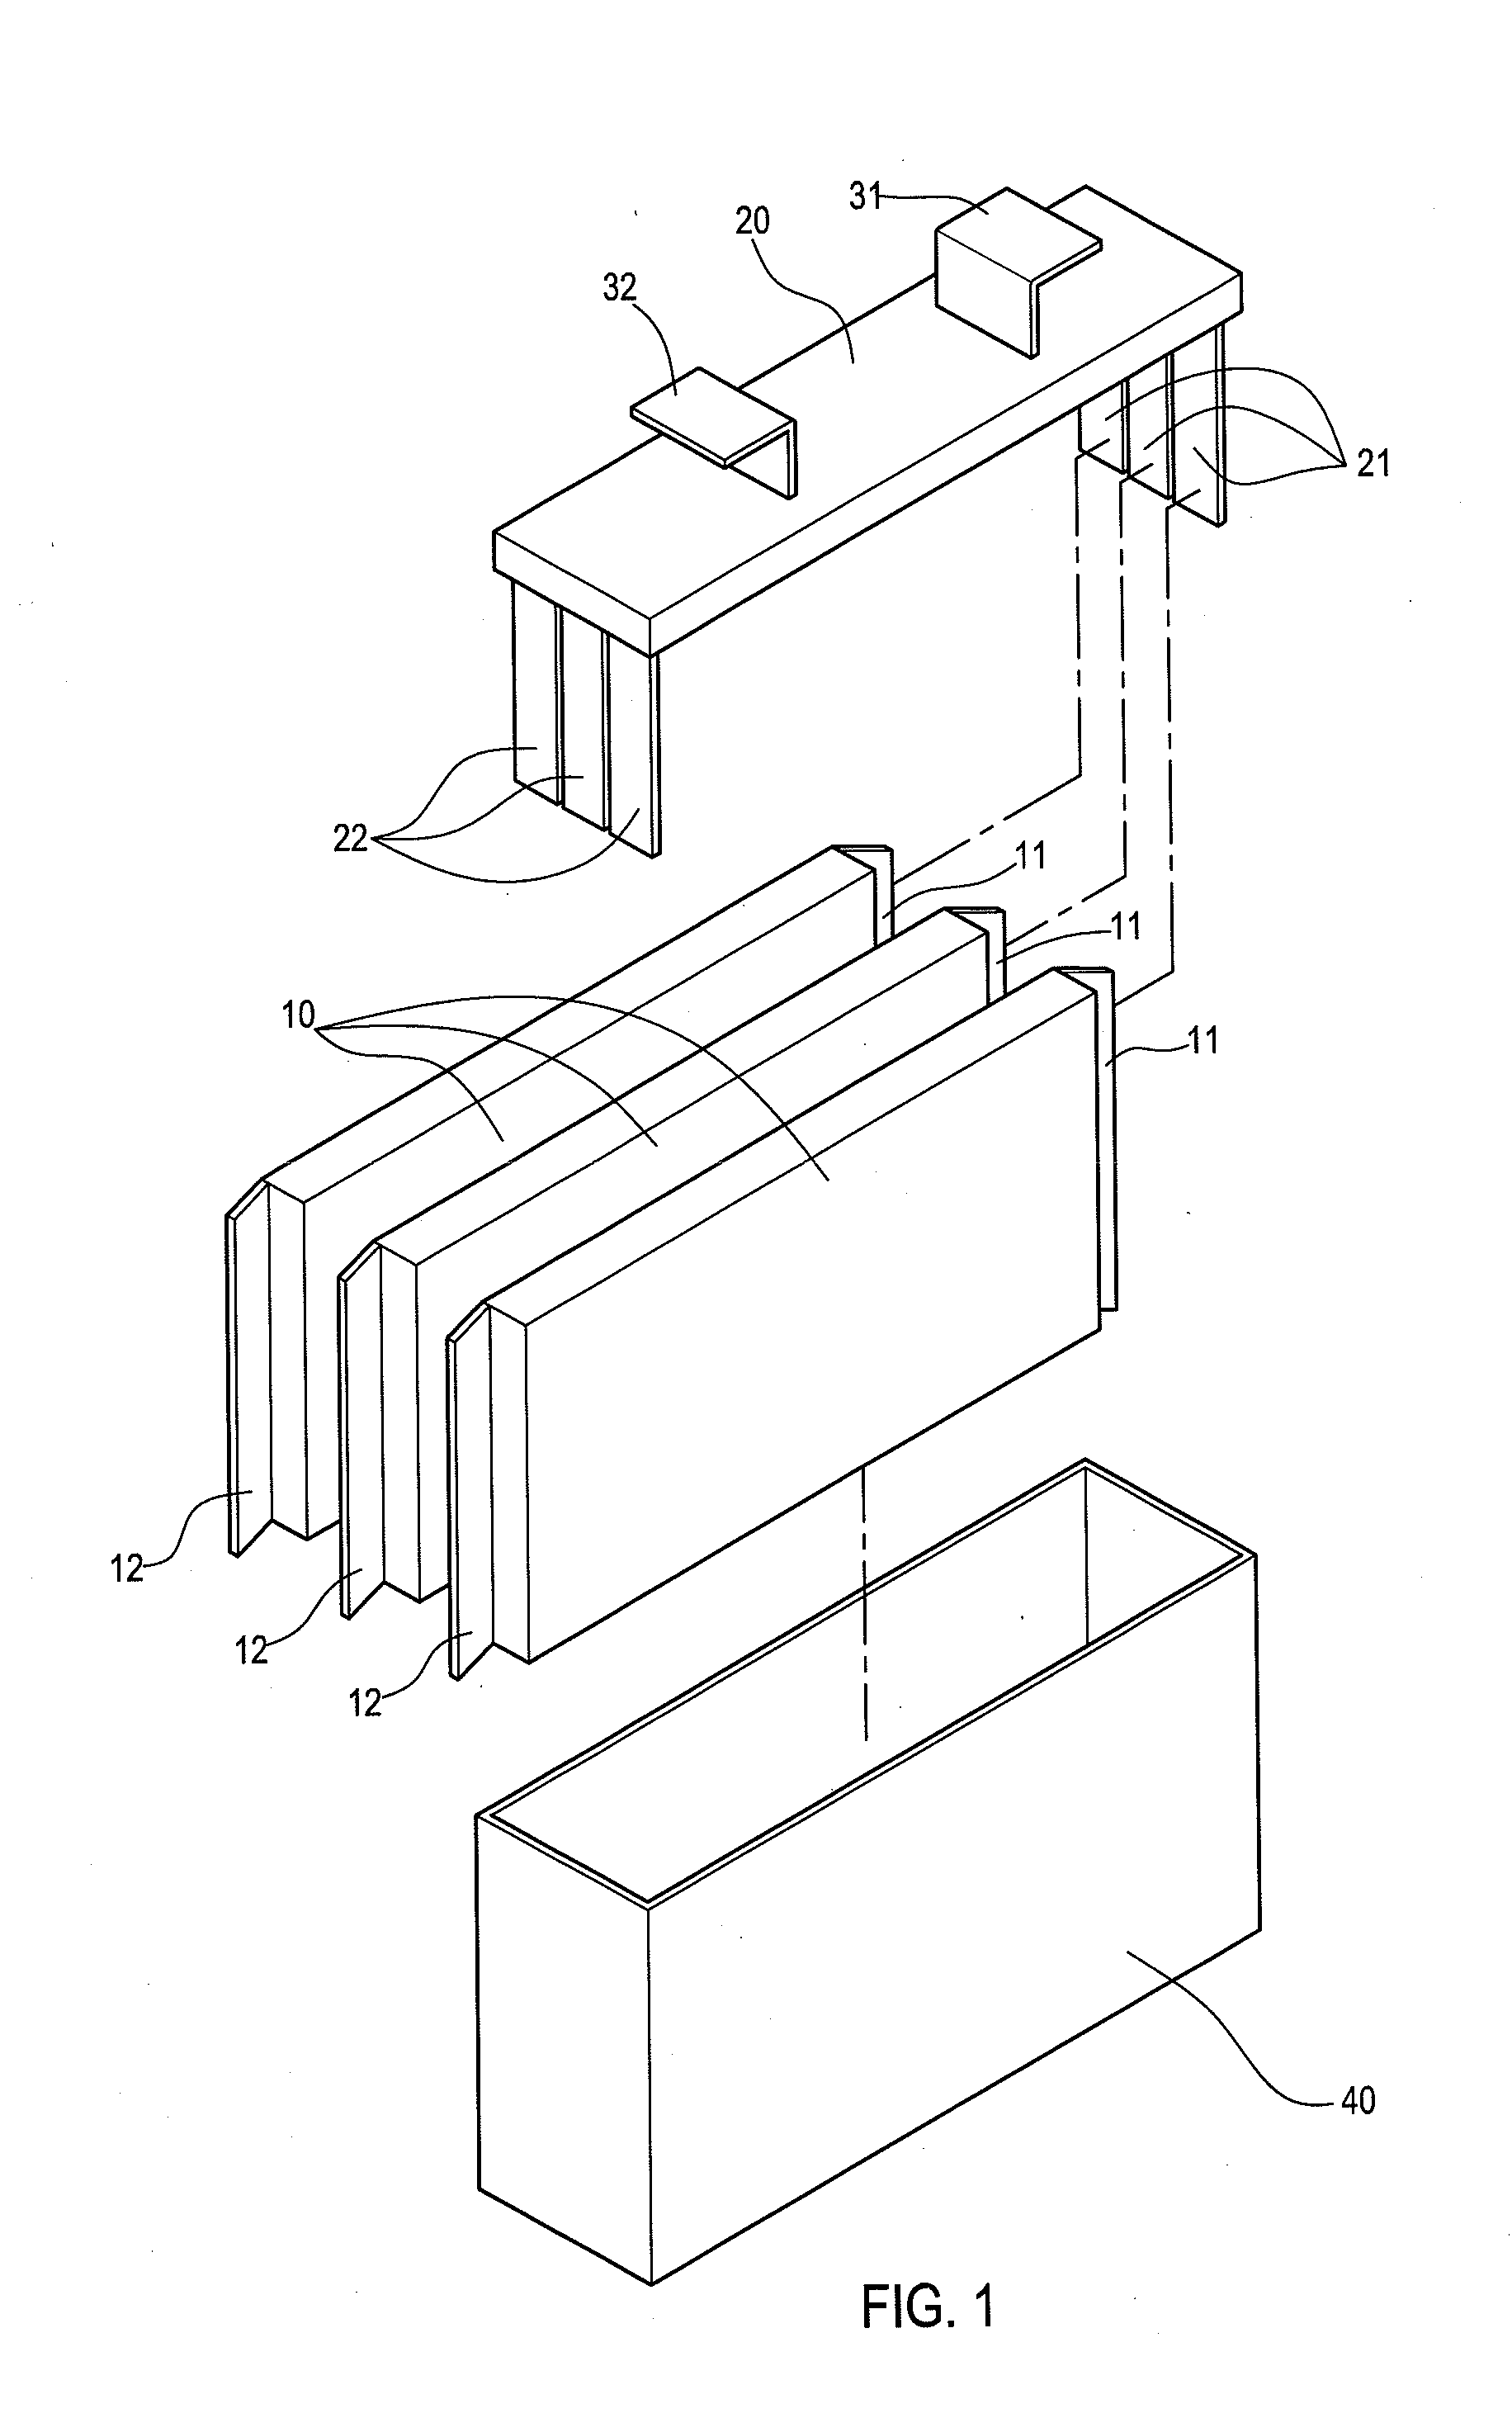 Conductive connection structure for secondary batteries